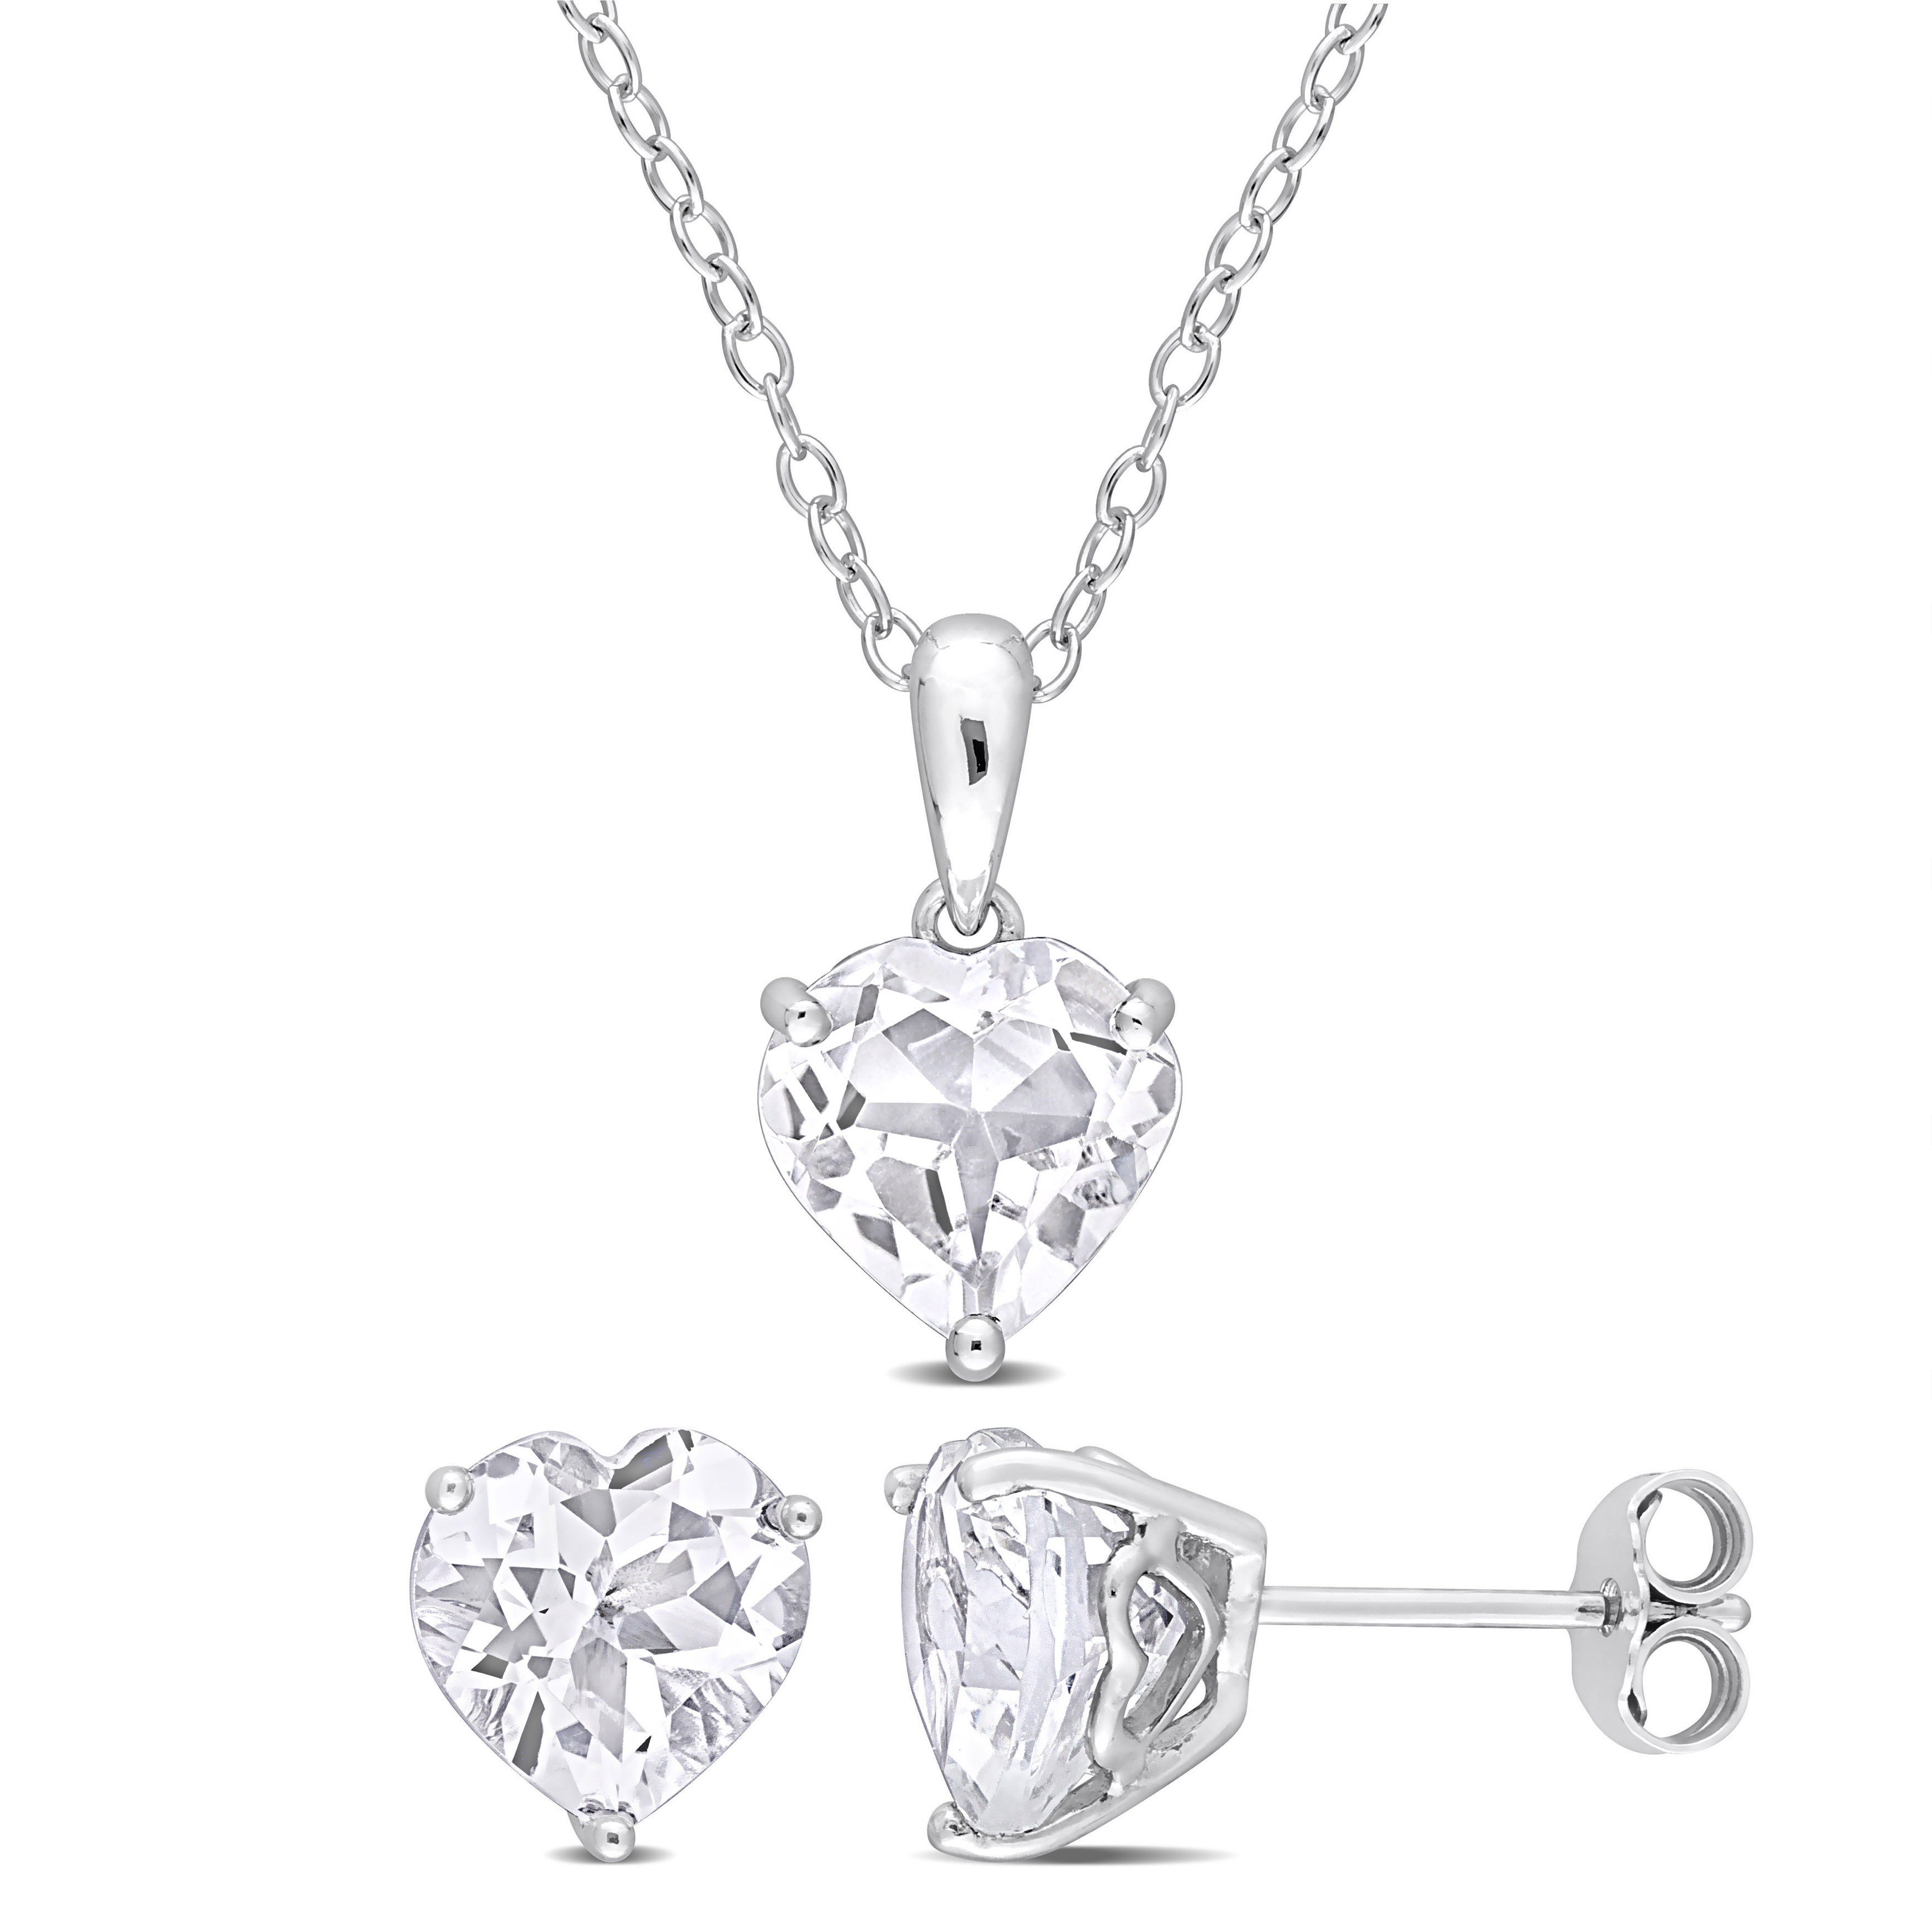 6 5/8 CT TGW Heart-Shape White Topaz 2-Piece Set of Pendant with Chain and Earrings in Sterling Silver